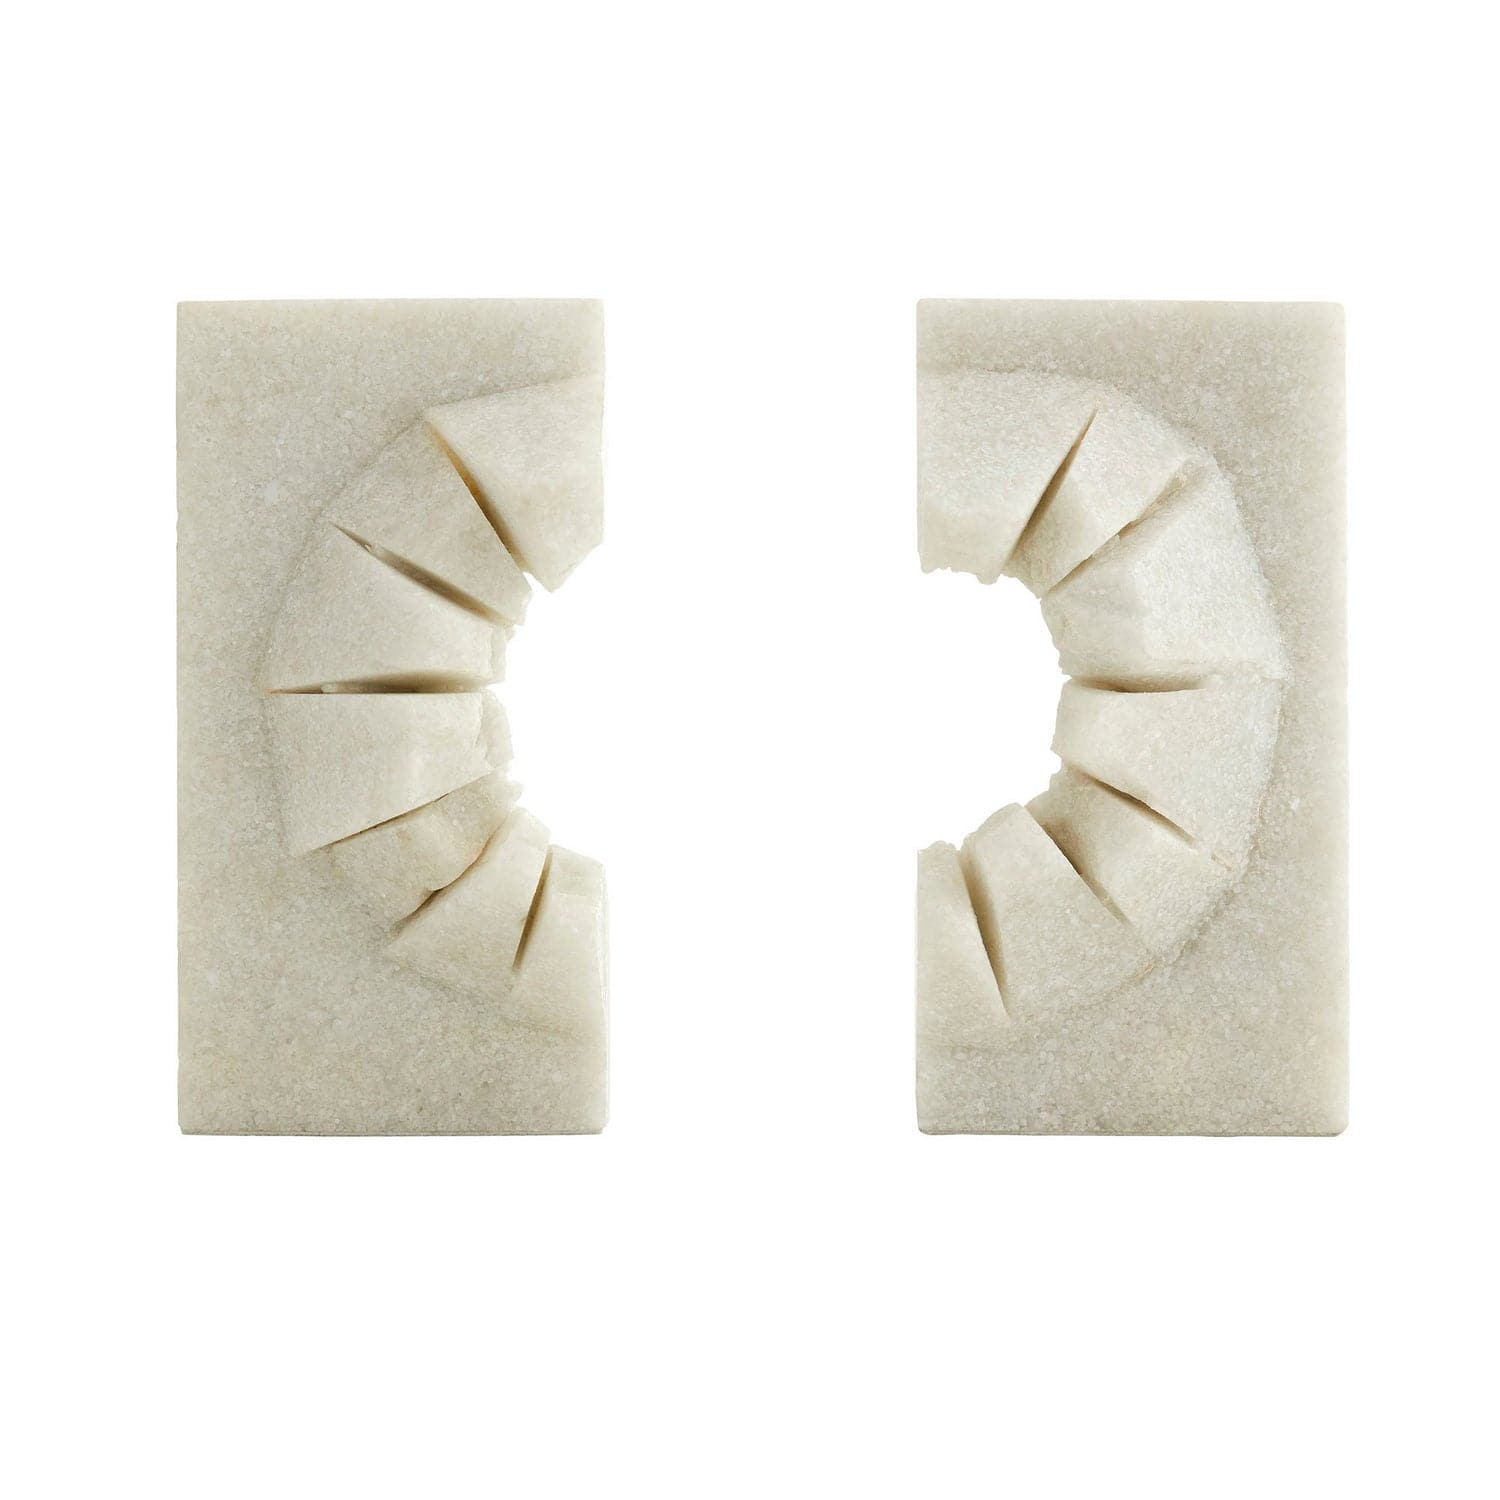 Arteriors - 9114 - Bookends, Set of 2 - Kylo - Ivory